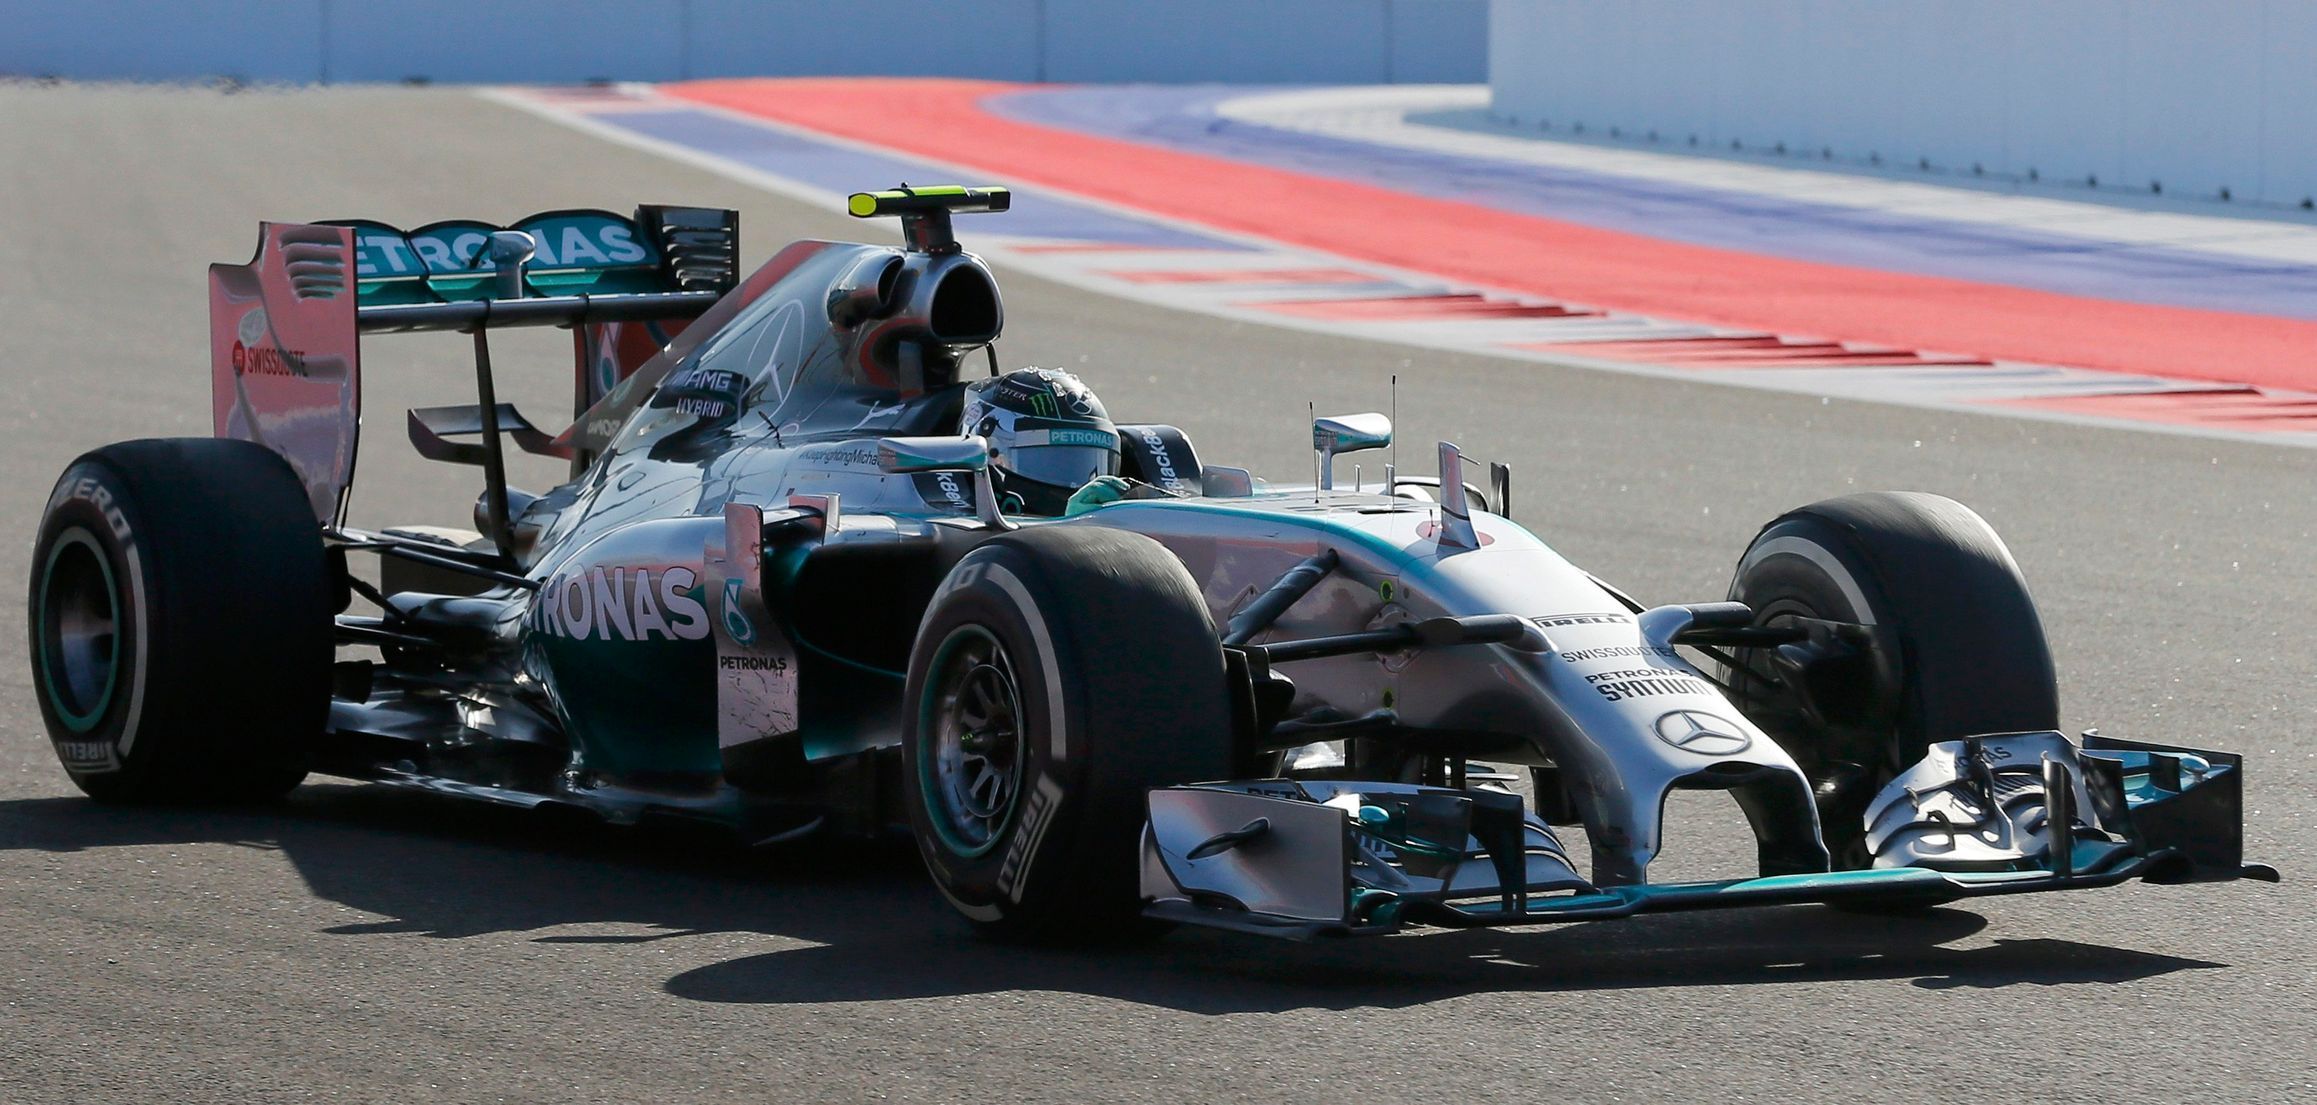 Mercedes Formula One driver Rosberg of Germany takes a curve during the first Russian Grand Prix in Sochi